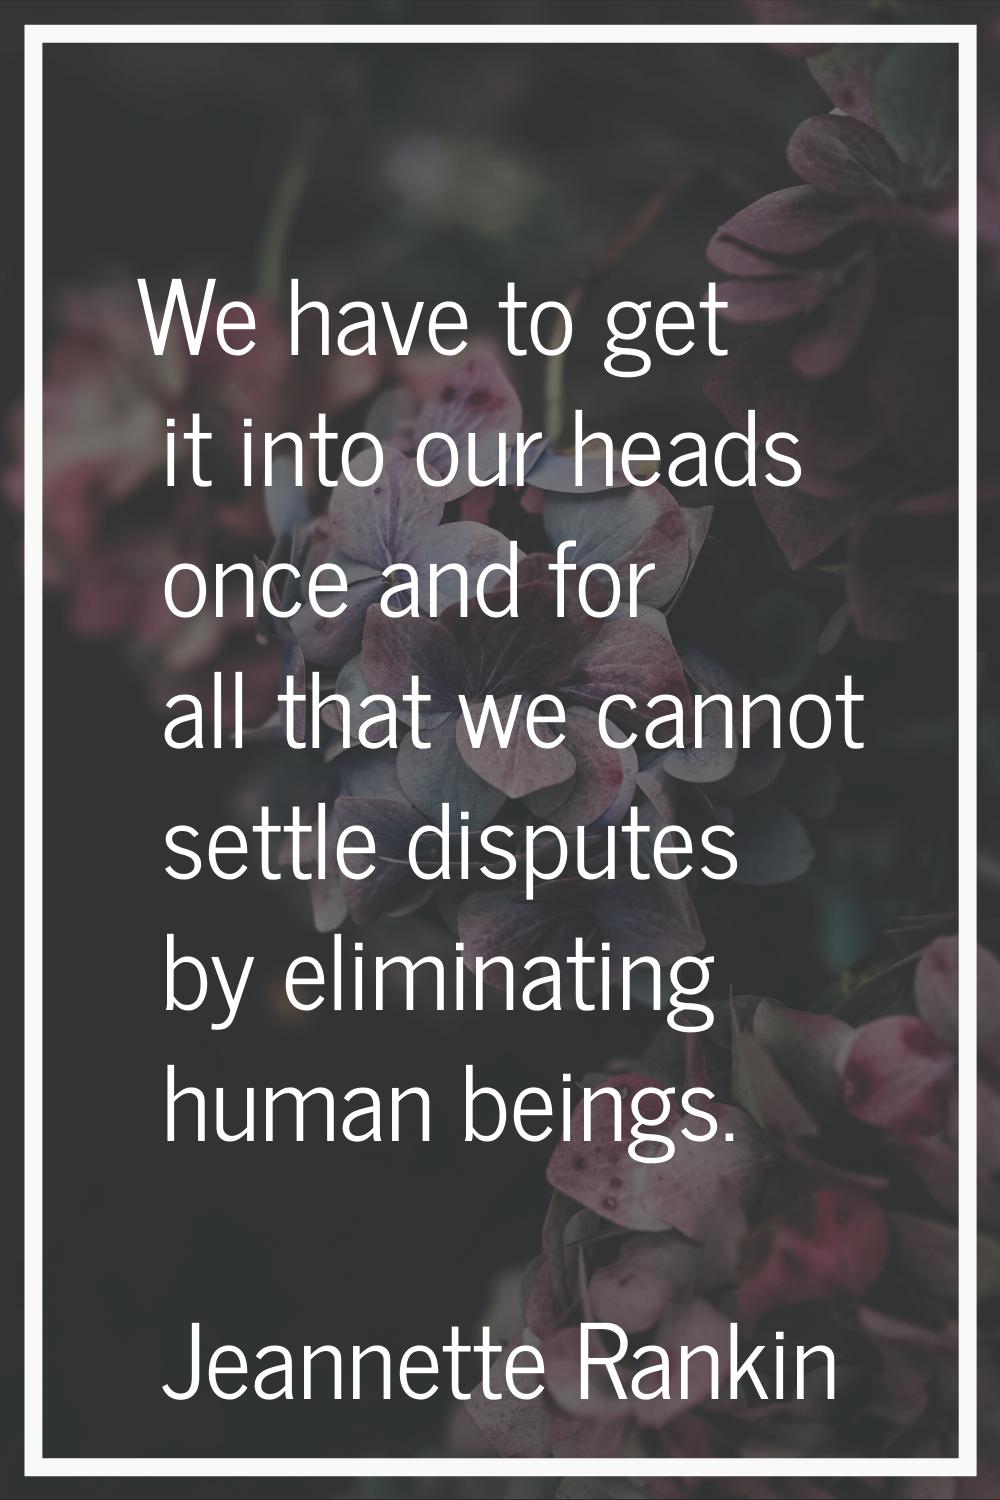 We have to get it into our heads once and for all that we cannot settle disputes by eliminating hum